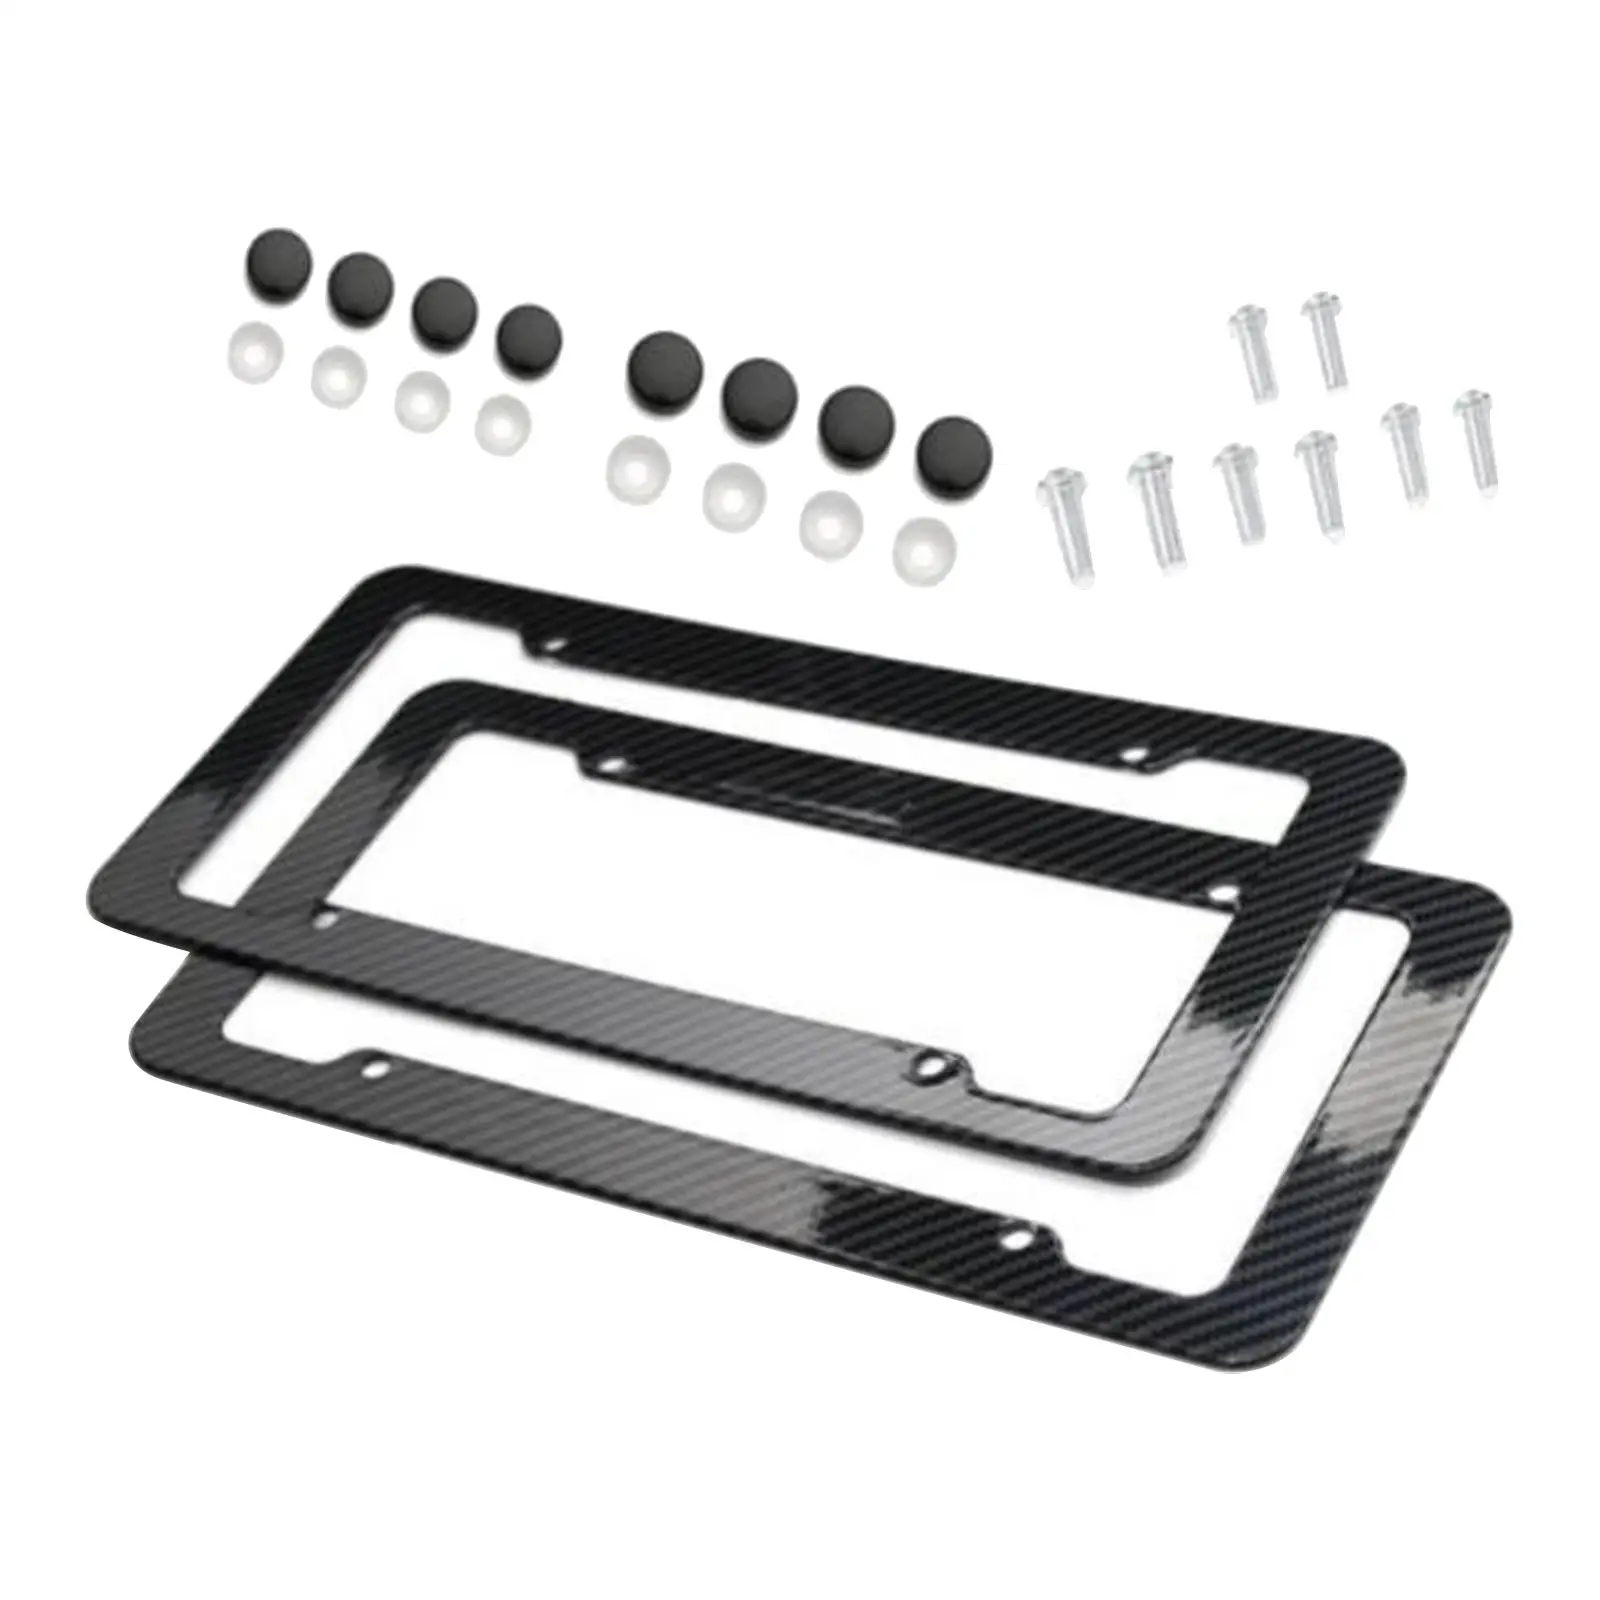 2Pcs Carbon Fiber License Frames with Screws Holder Plate Covers Front and Rear for us Accessories Durable